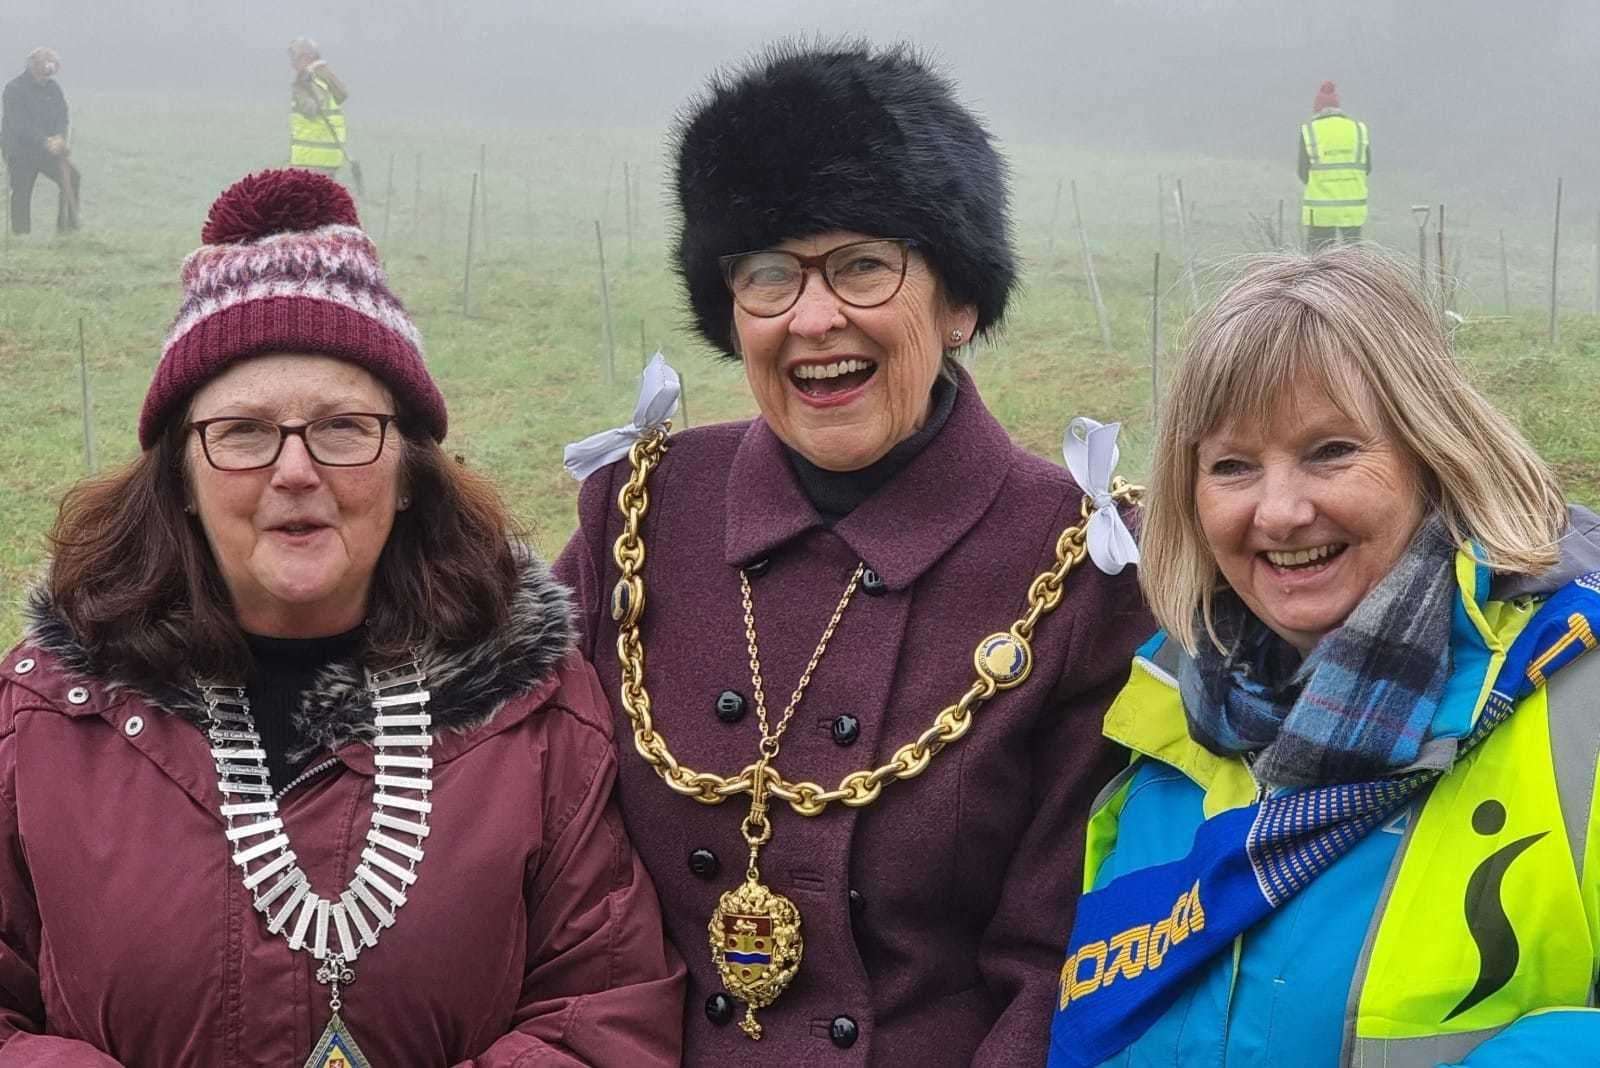 The Mayor, Fay Gooch, with the South East Regional President of the Soroptimists, Yvonne Freeman, left, and Sharon Forghani, right